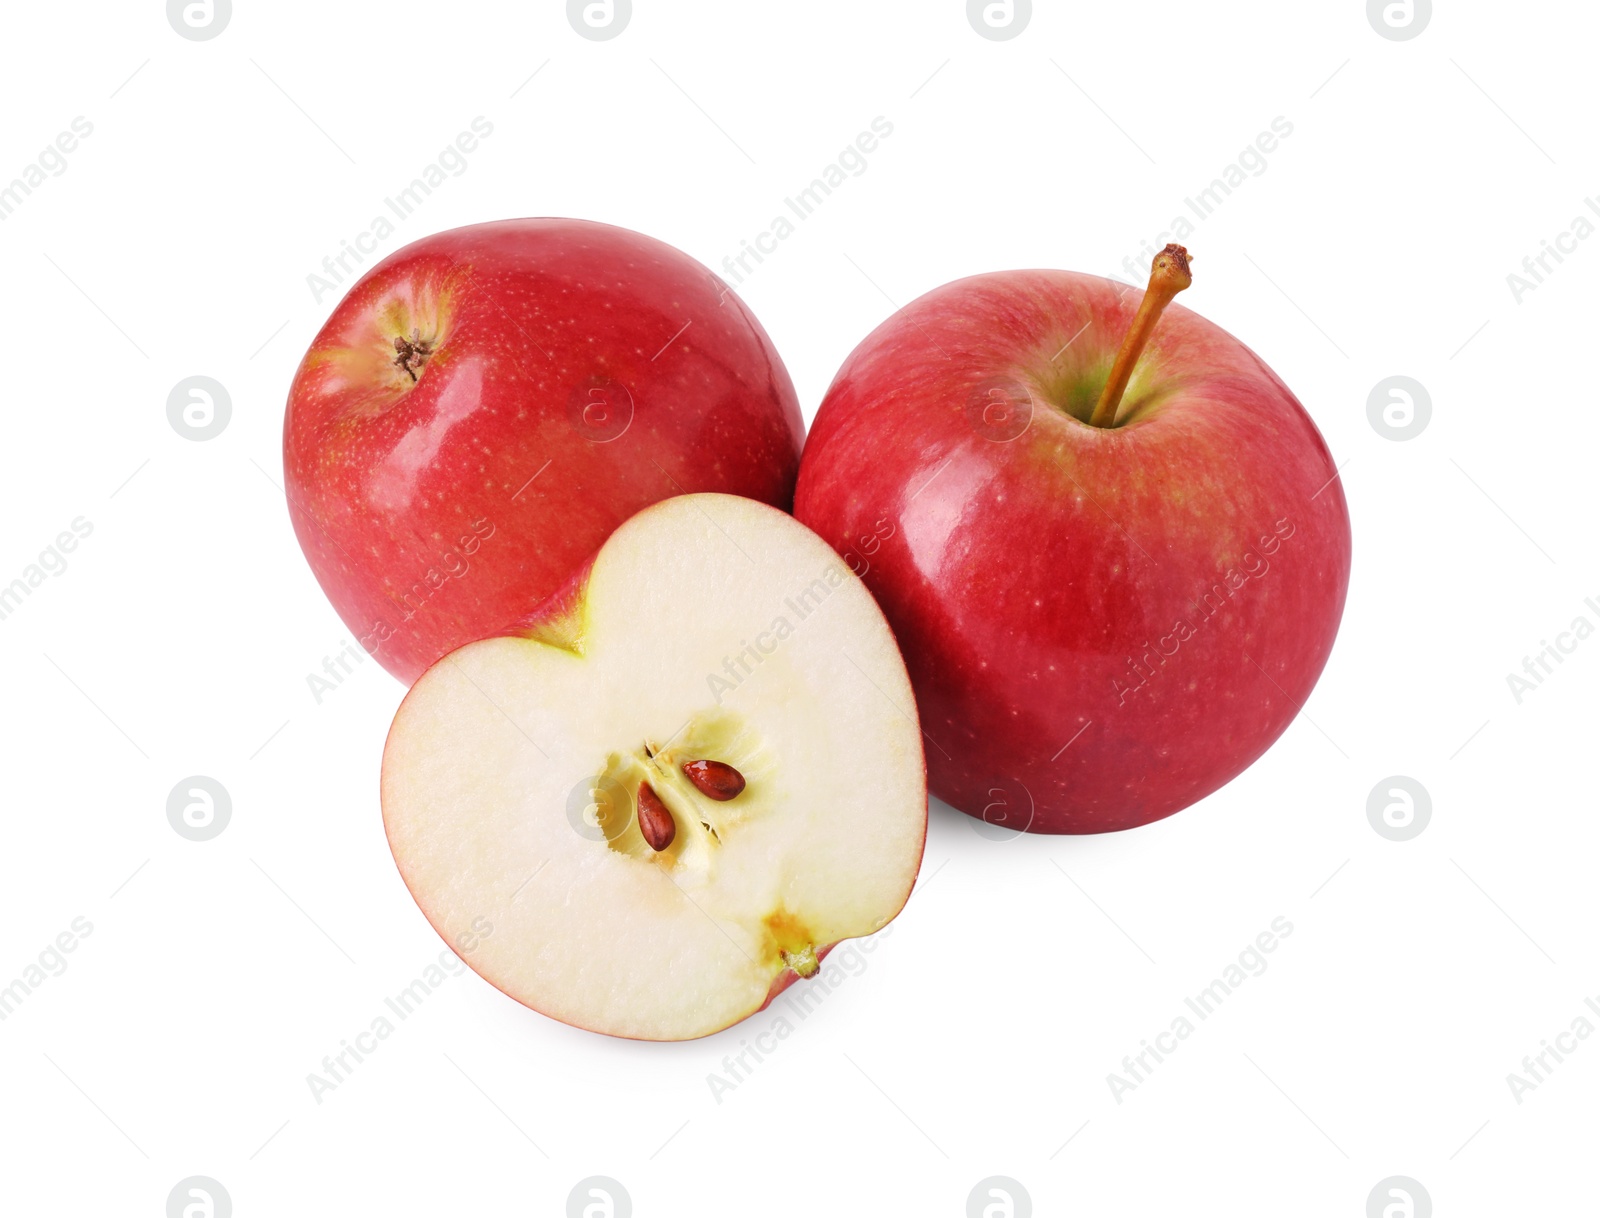 Photo of Whole and cut red apples isolated on white